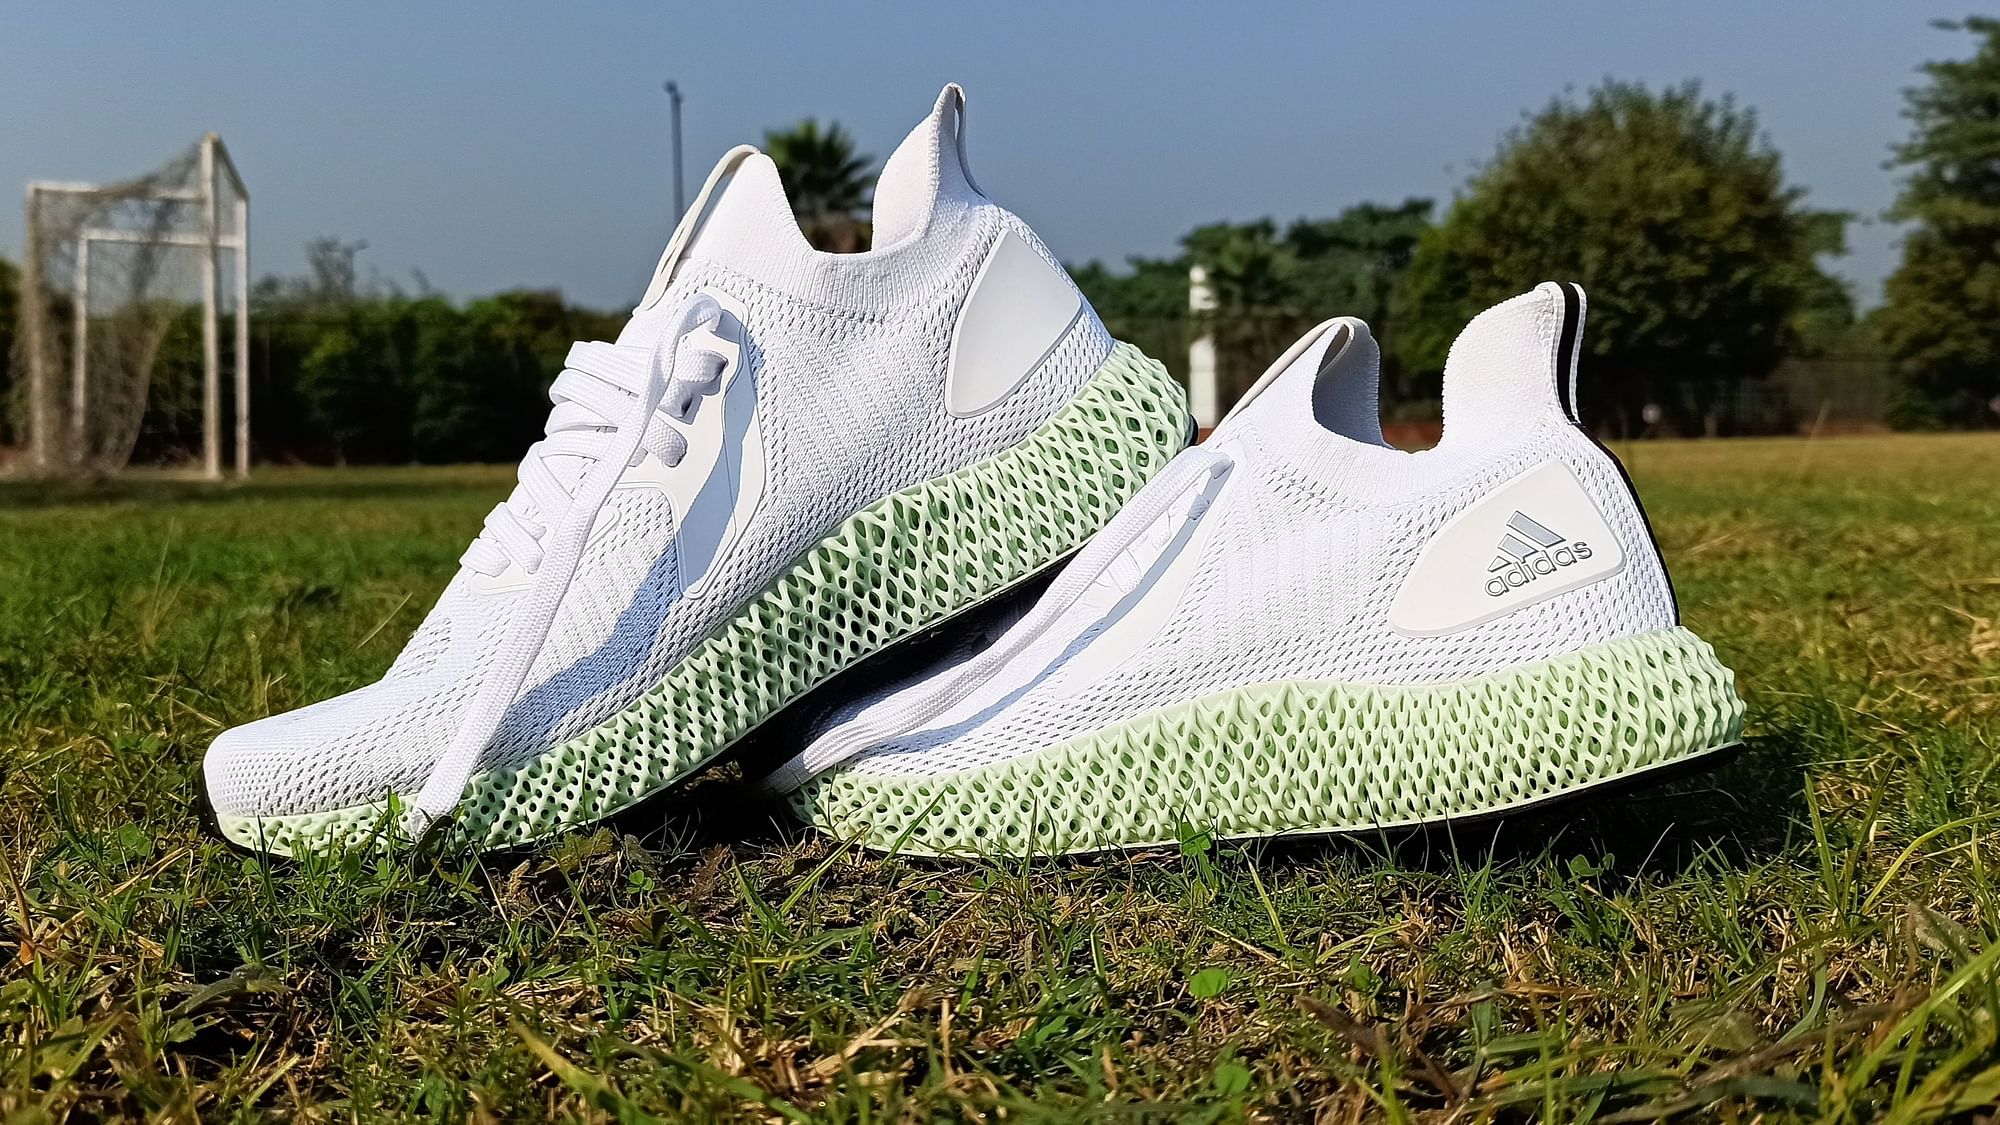 The Adidas Alphaedge 4D uses a&nbsp;blend of ultraviolet curable resin and polyurethane in the midsole.